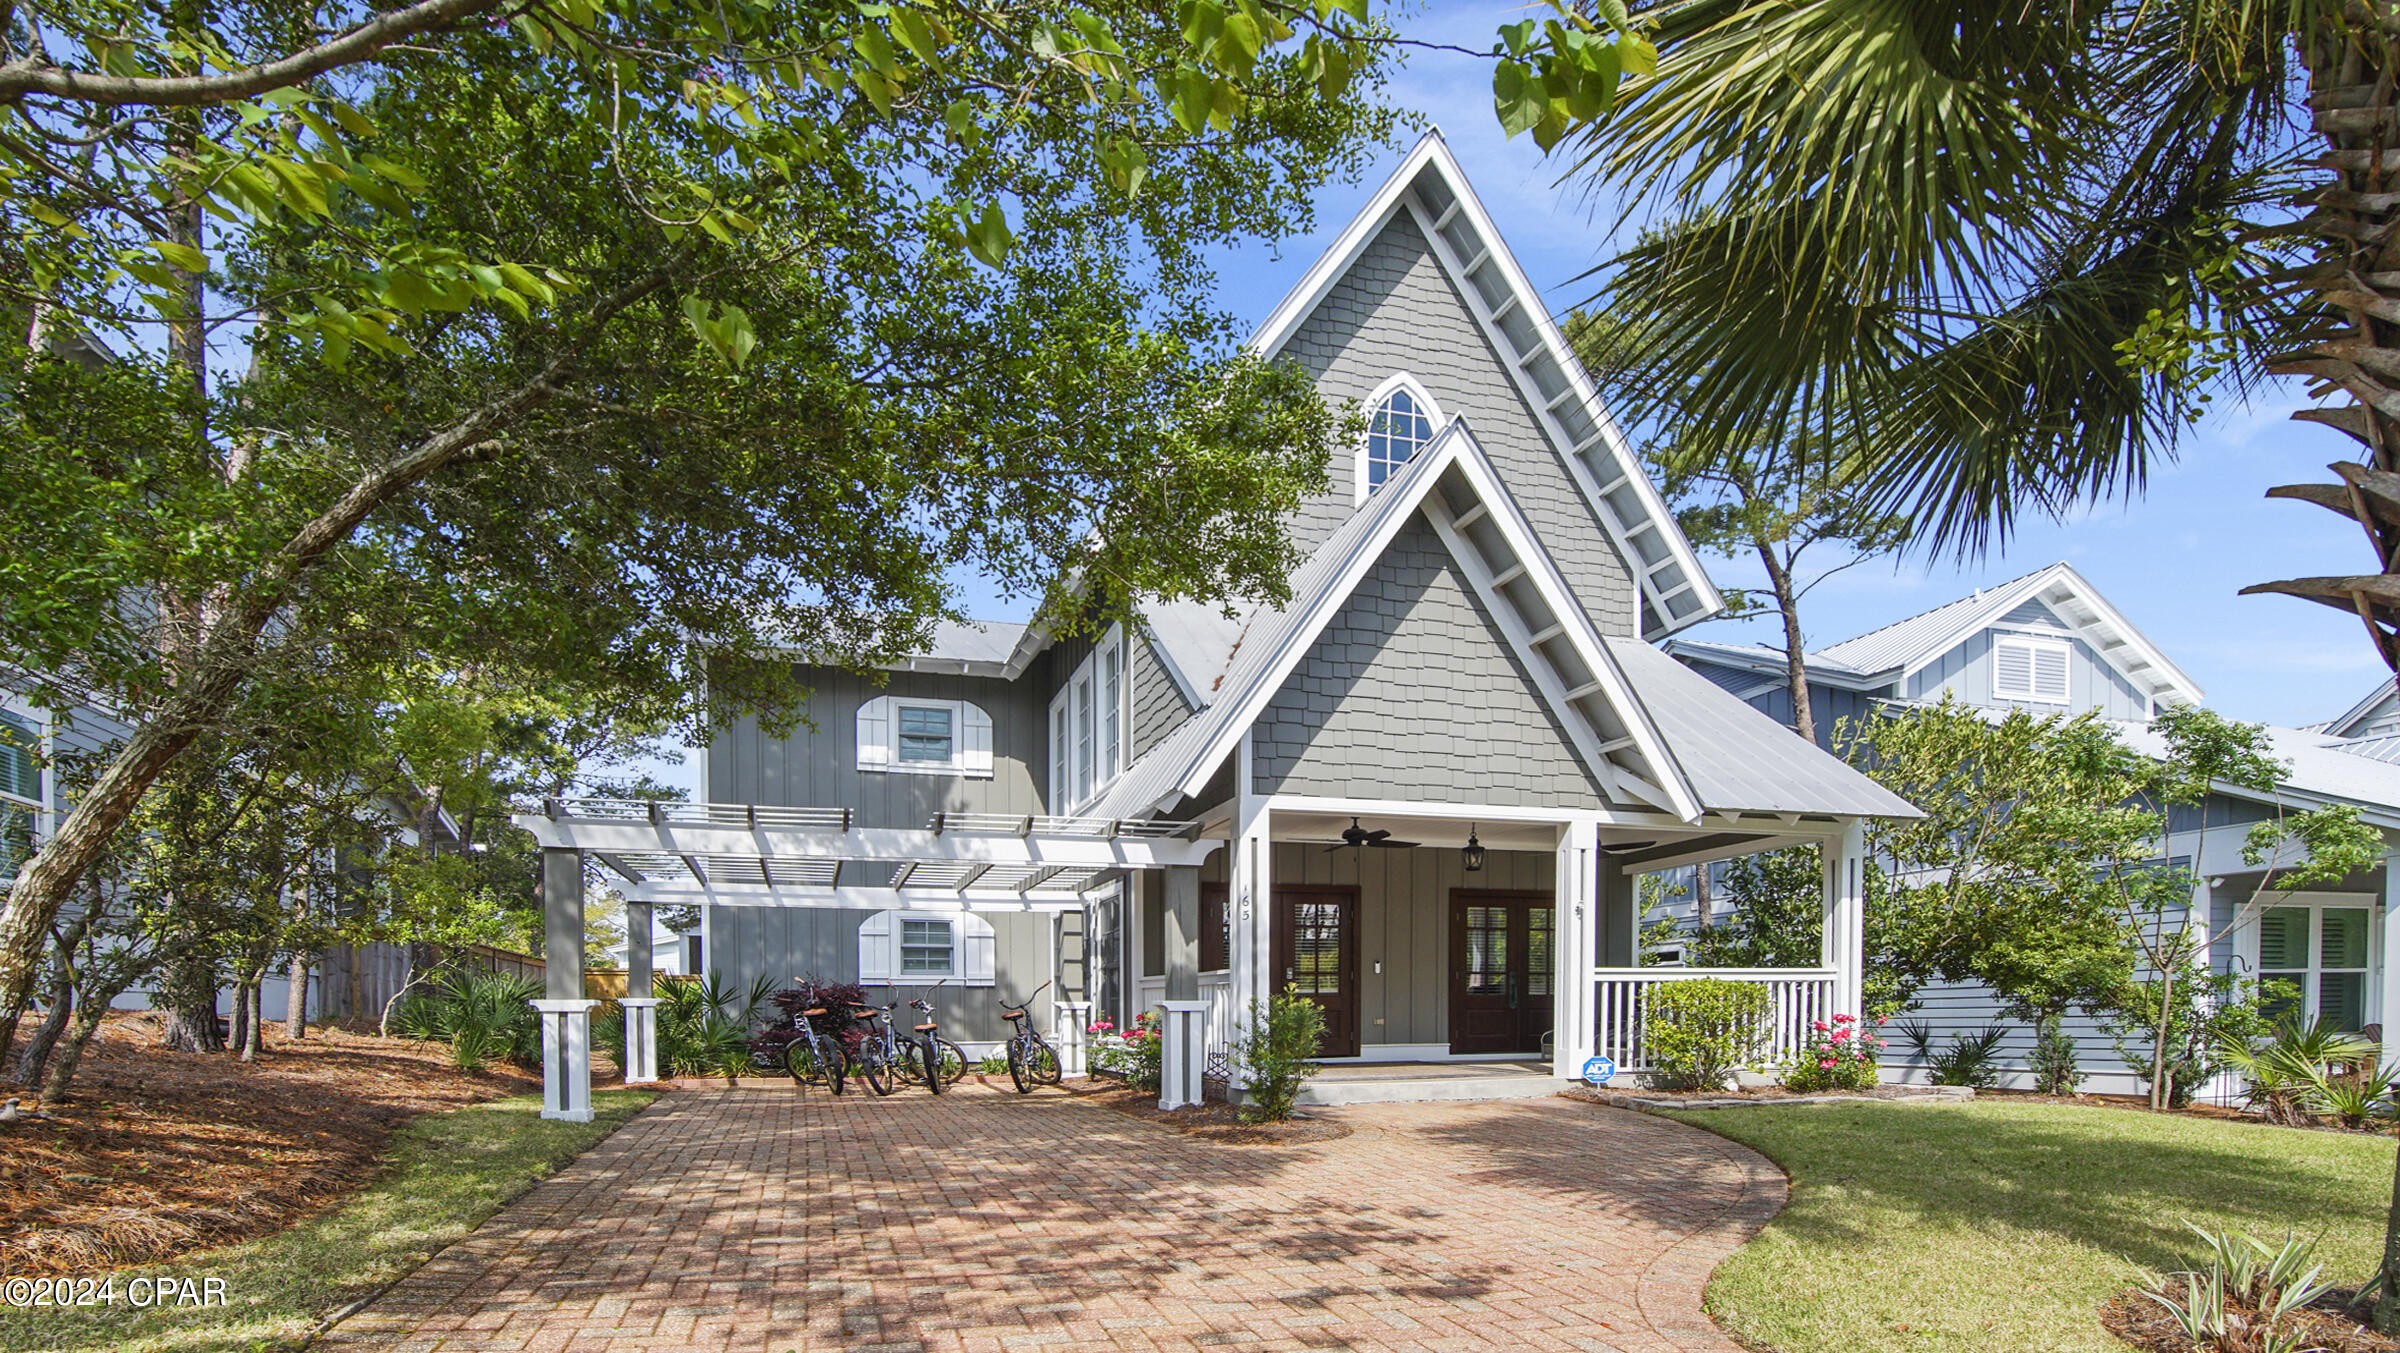 165 W Willow Mist Road, Inlet Beach, Florida, 32461, United States, 3 Bedrooms Bedrooms, ,4 BathroomsBathrooms,Residential,For Sale,165 w willow mist RD,1504146